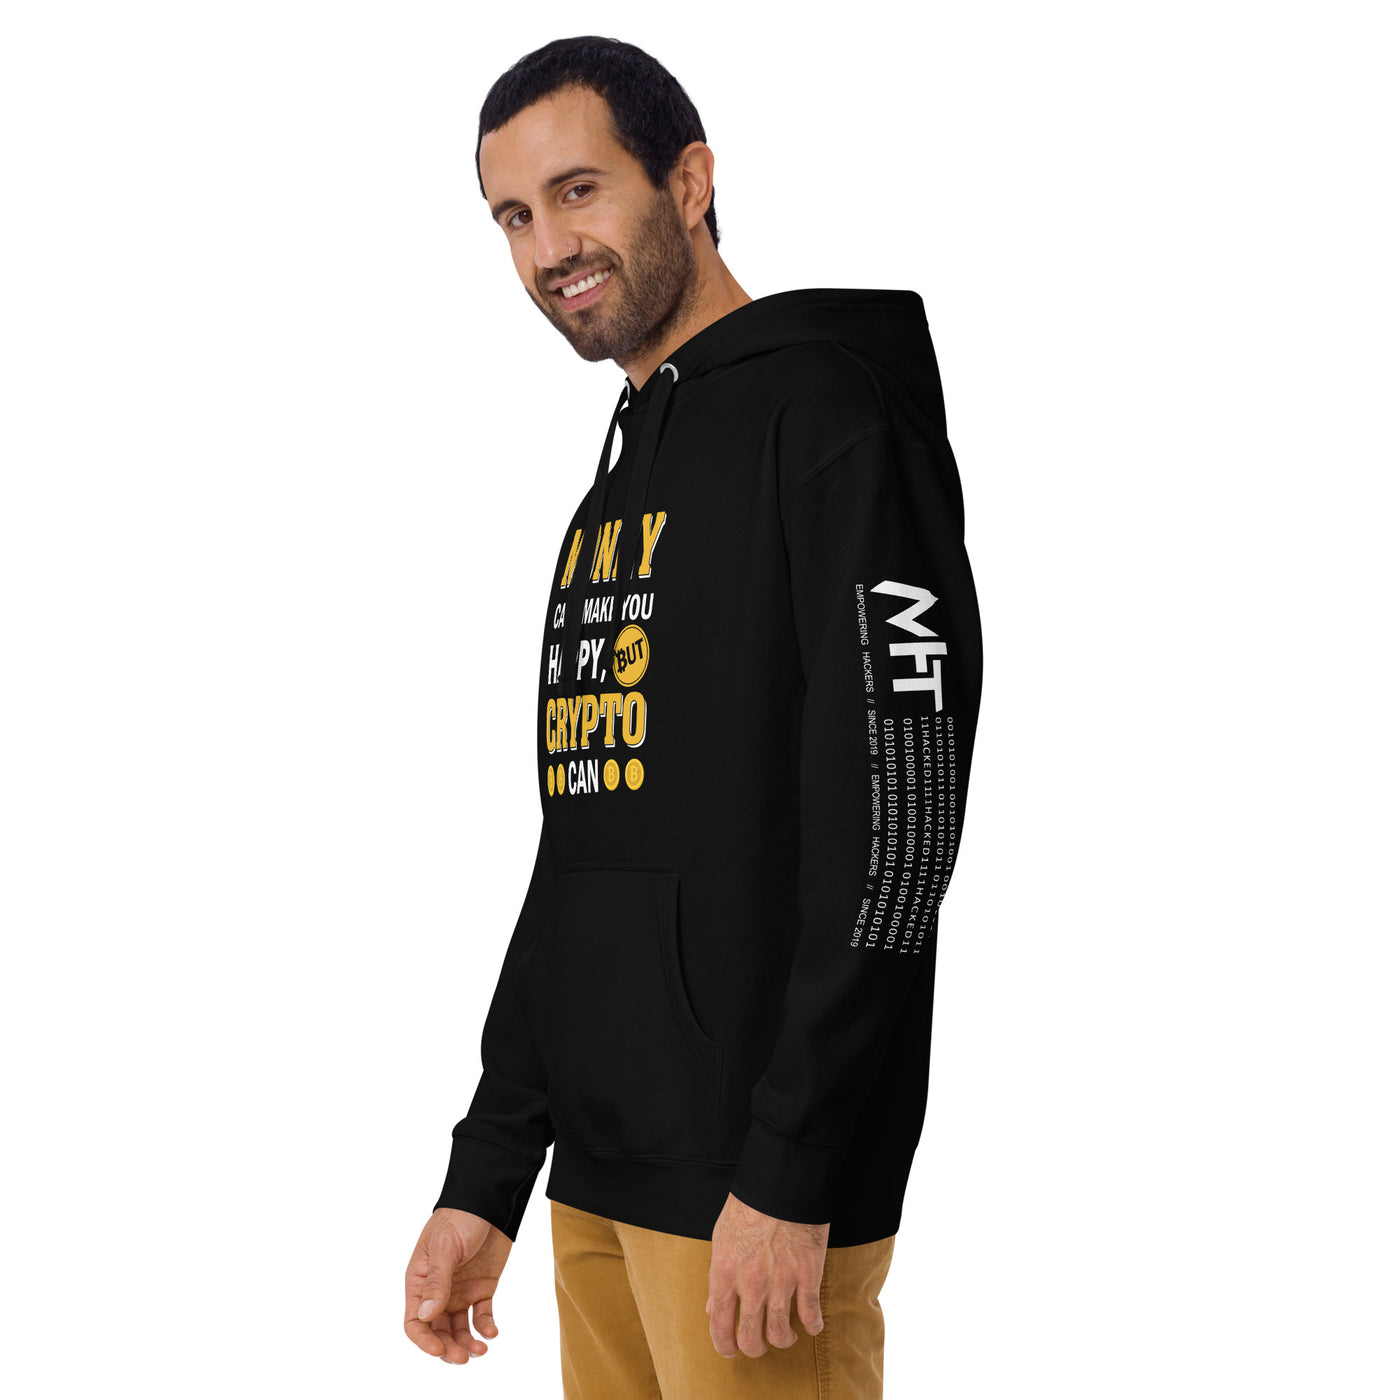 Money can't Buy You Happiness but Bitcoin Can Unisex Hoodie